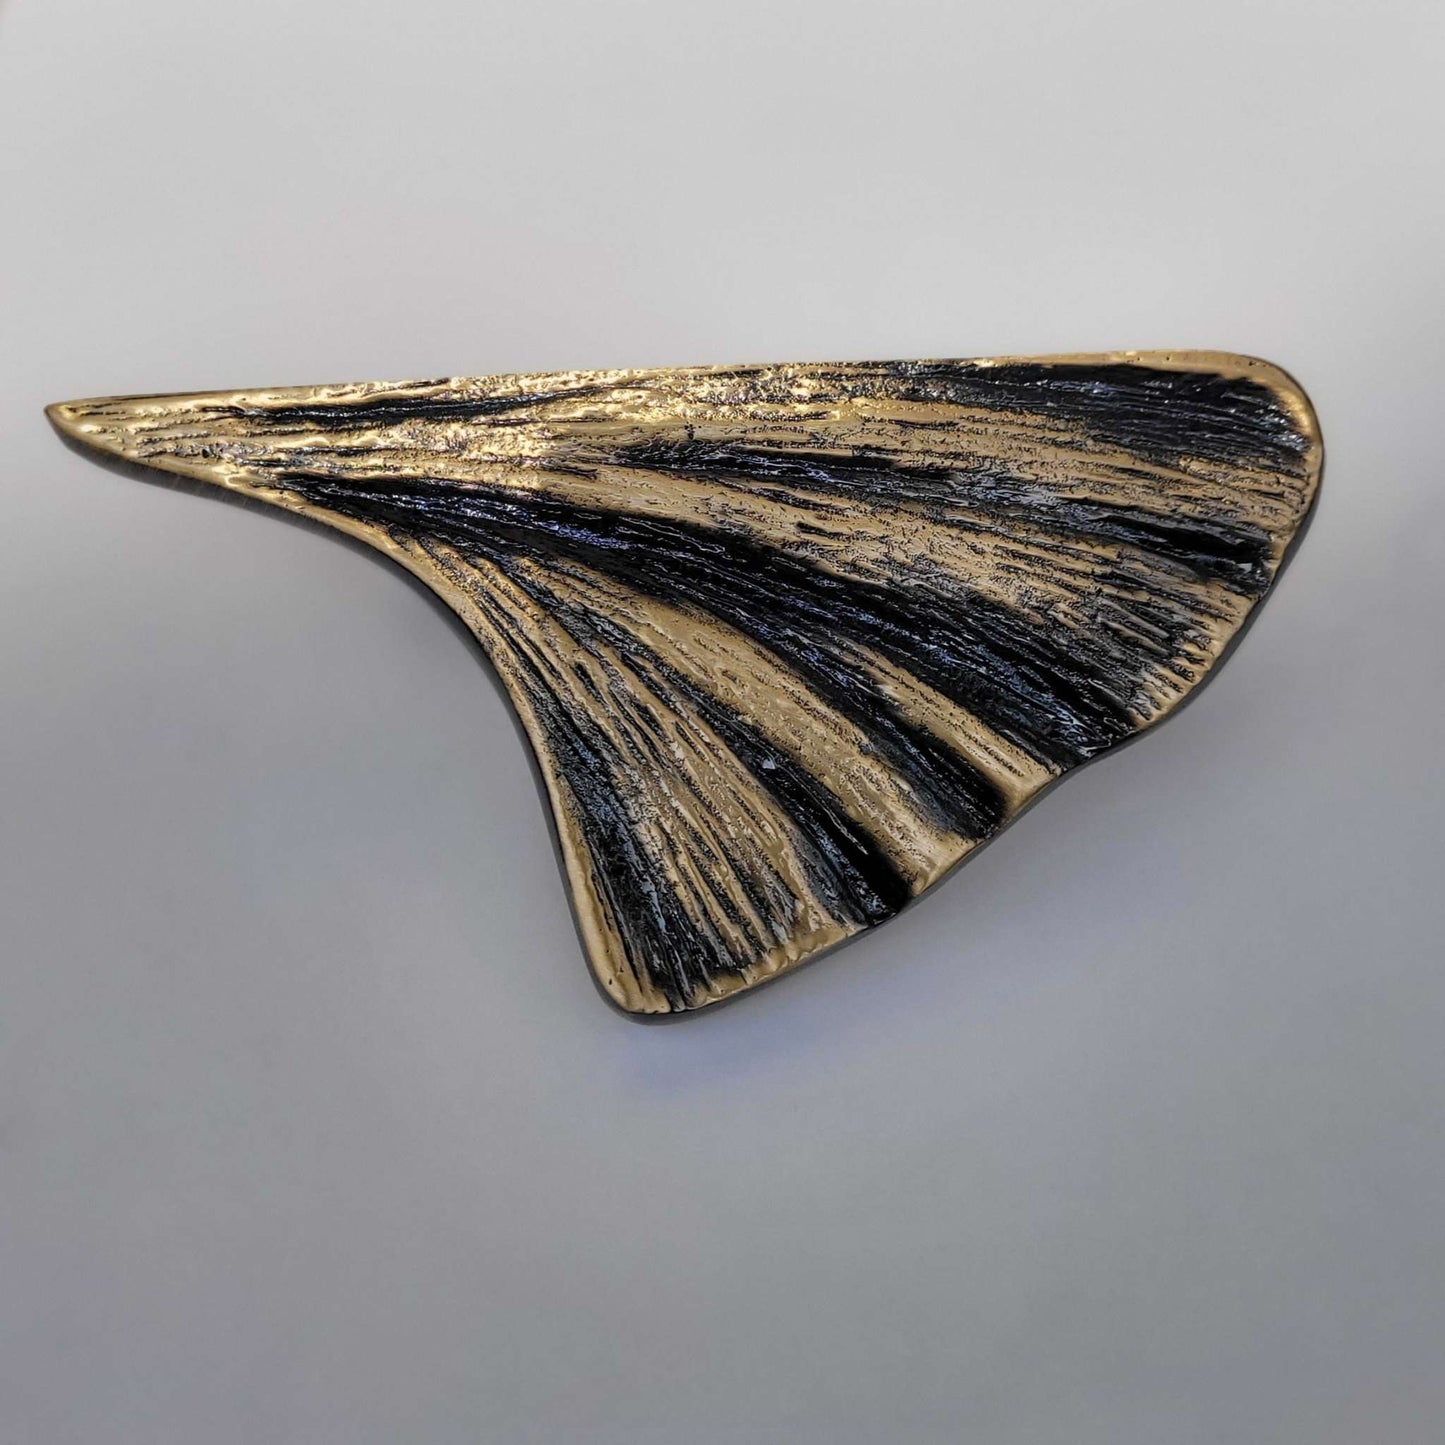 Gingko, Solid Brass Door Pulls Inspired by the timeliness of nature, Gingko is wispy, yet substantial. Gingko is so versatile, it can be installed side-by-side as a pair on cabinets, horizontally Door HandlesGingko, Solid Brass Large Pulls